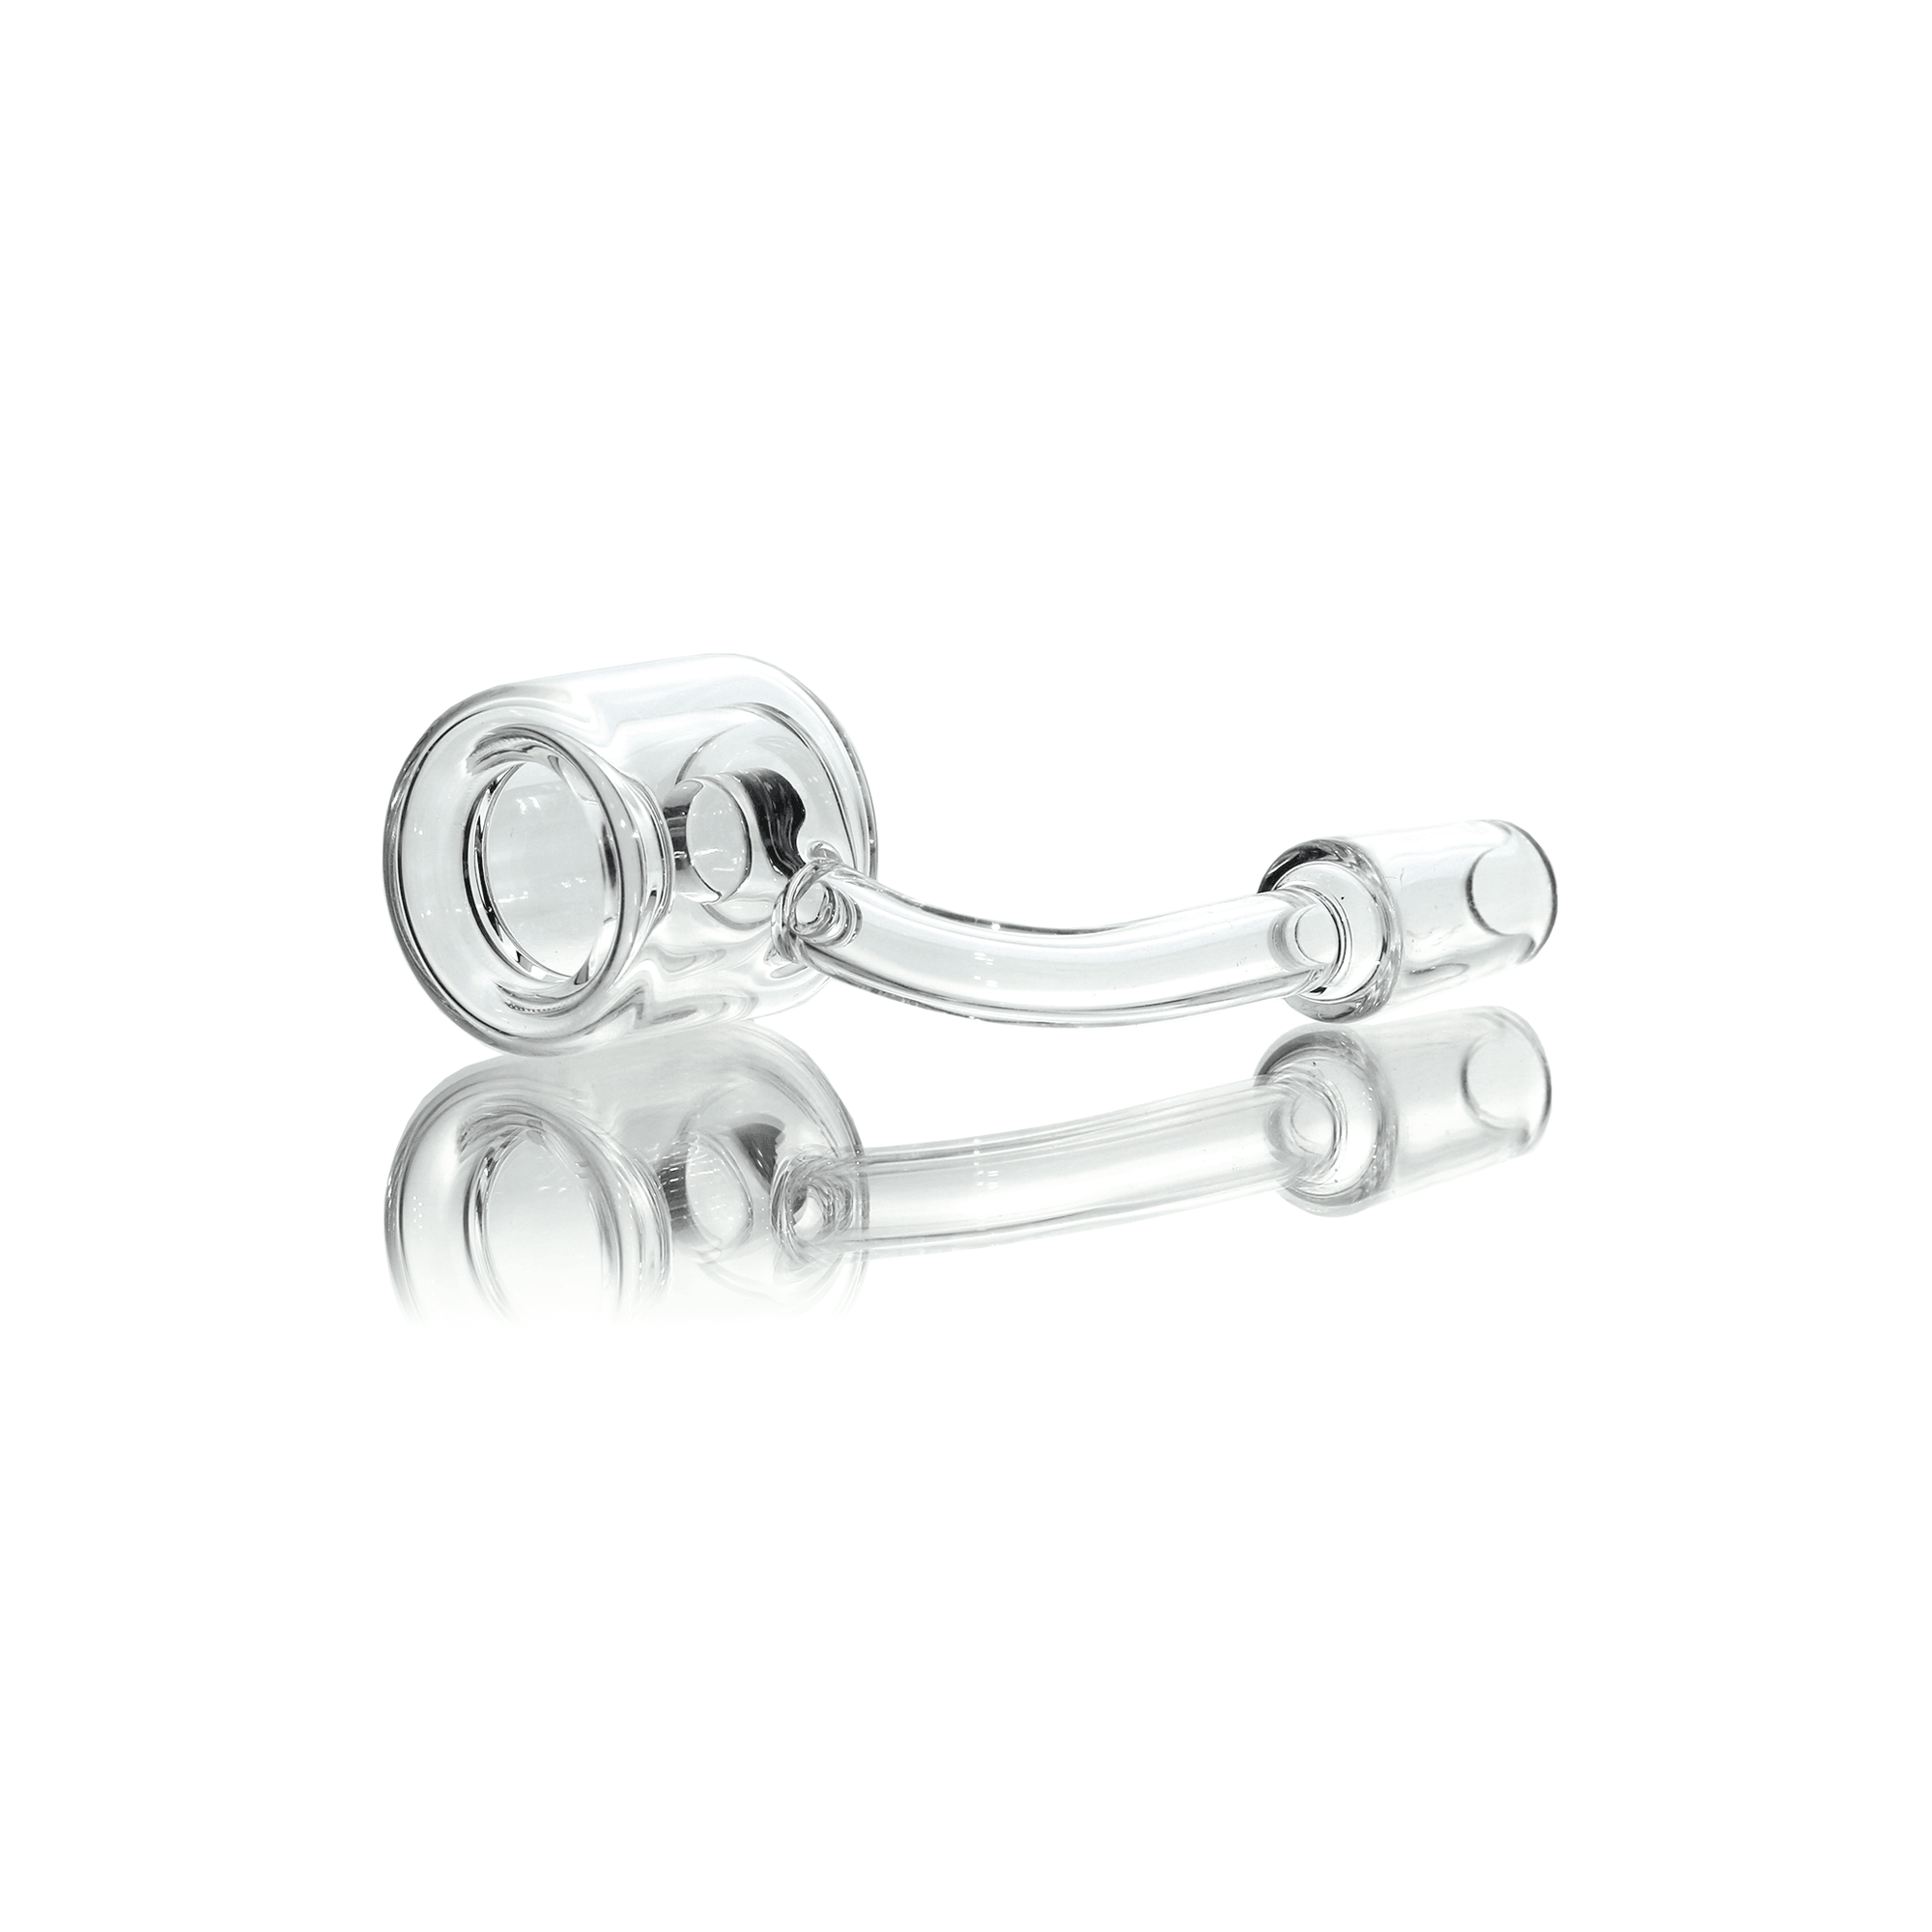 Quartz Banger Thermal Core Reactor 14mm Male With Saucer Cap | Prone Banger View | Dabbing Warehouse